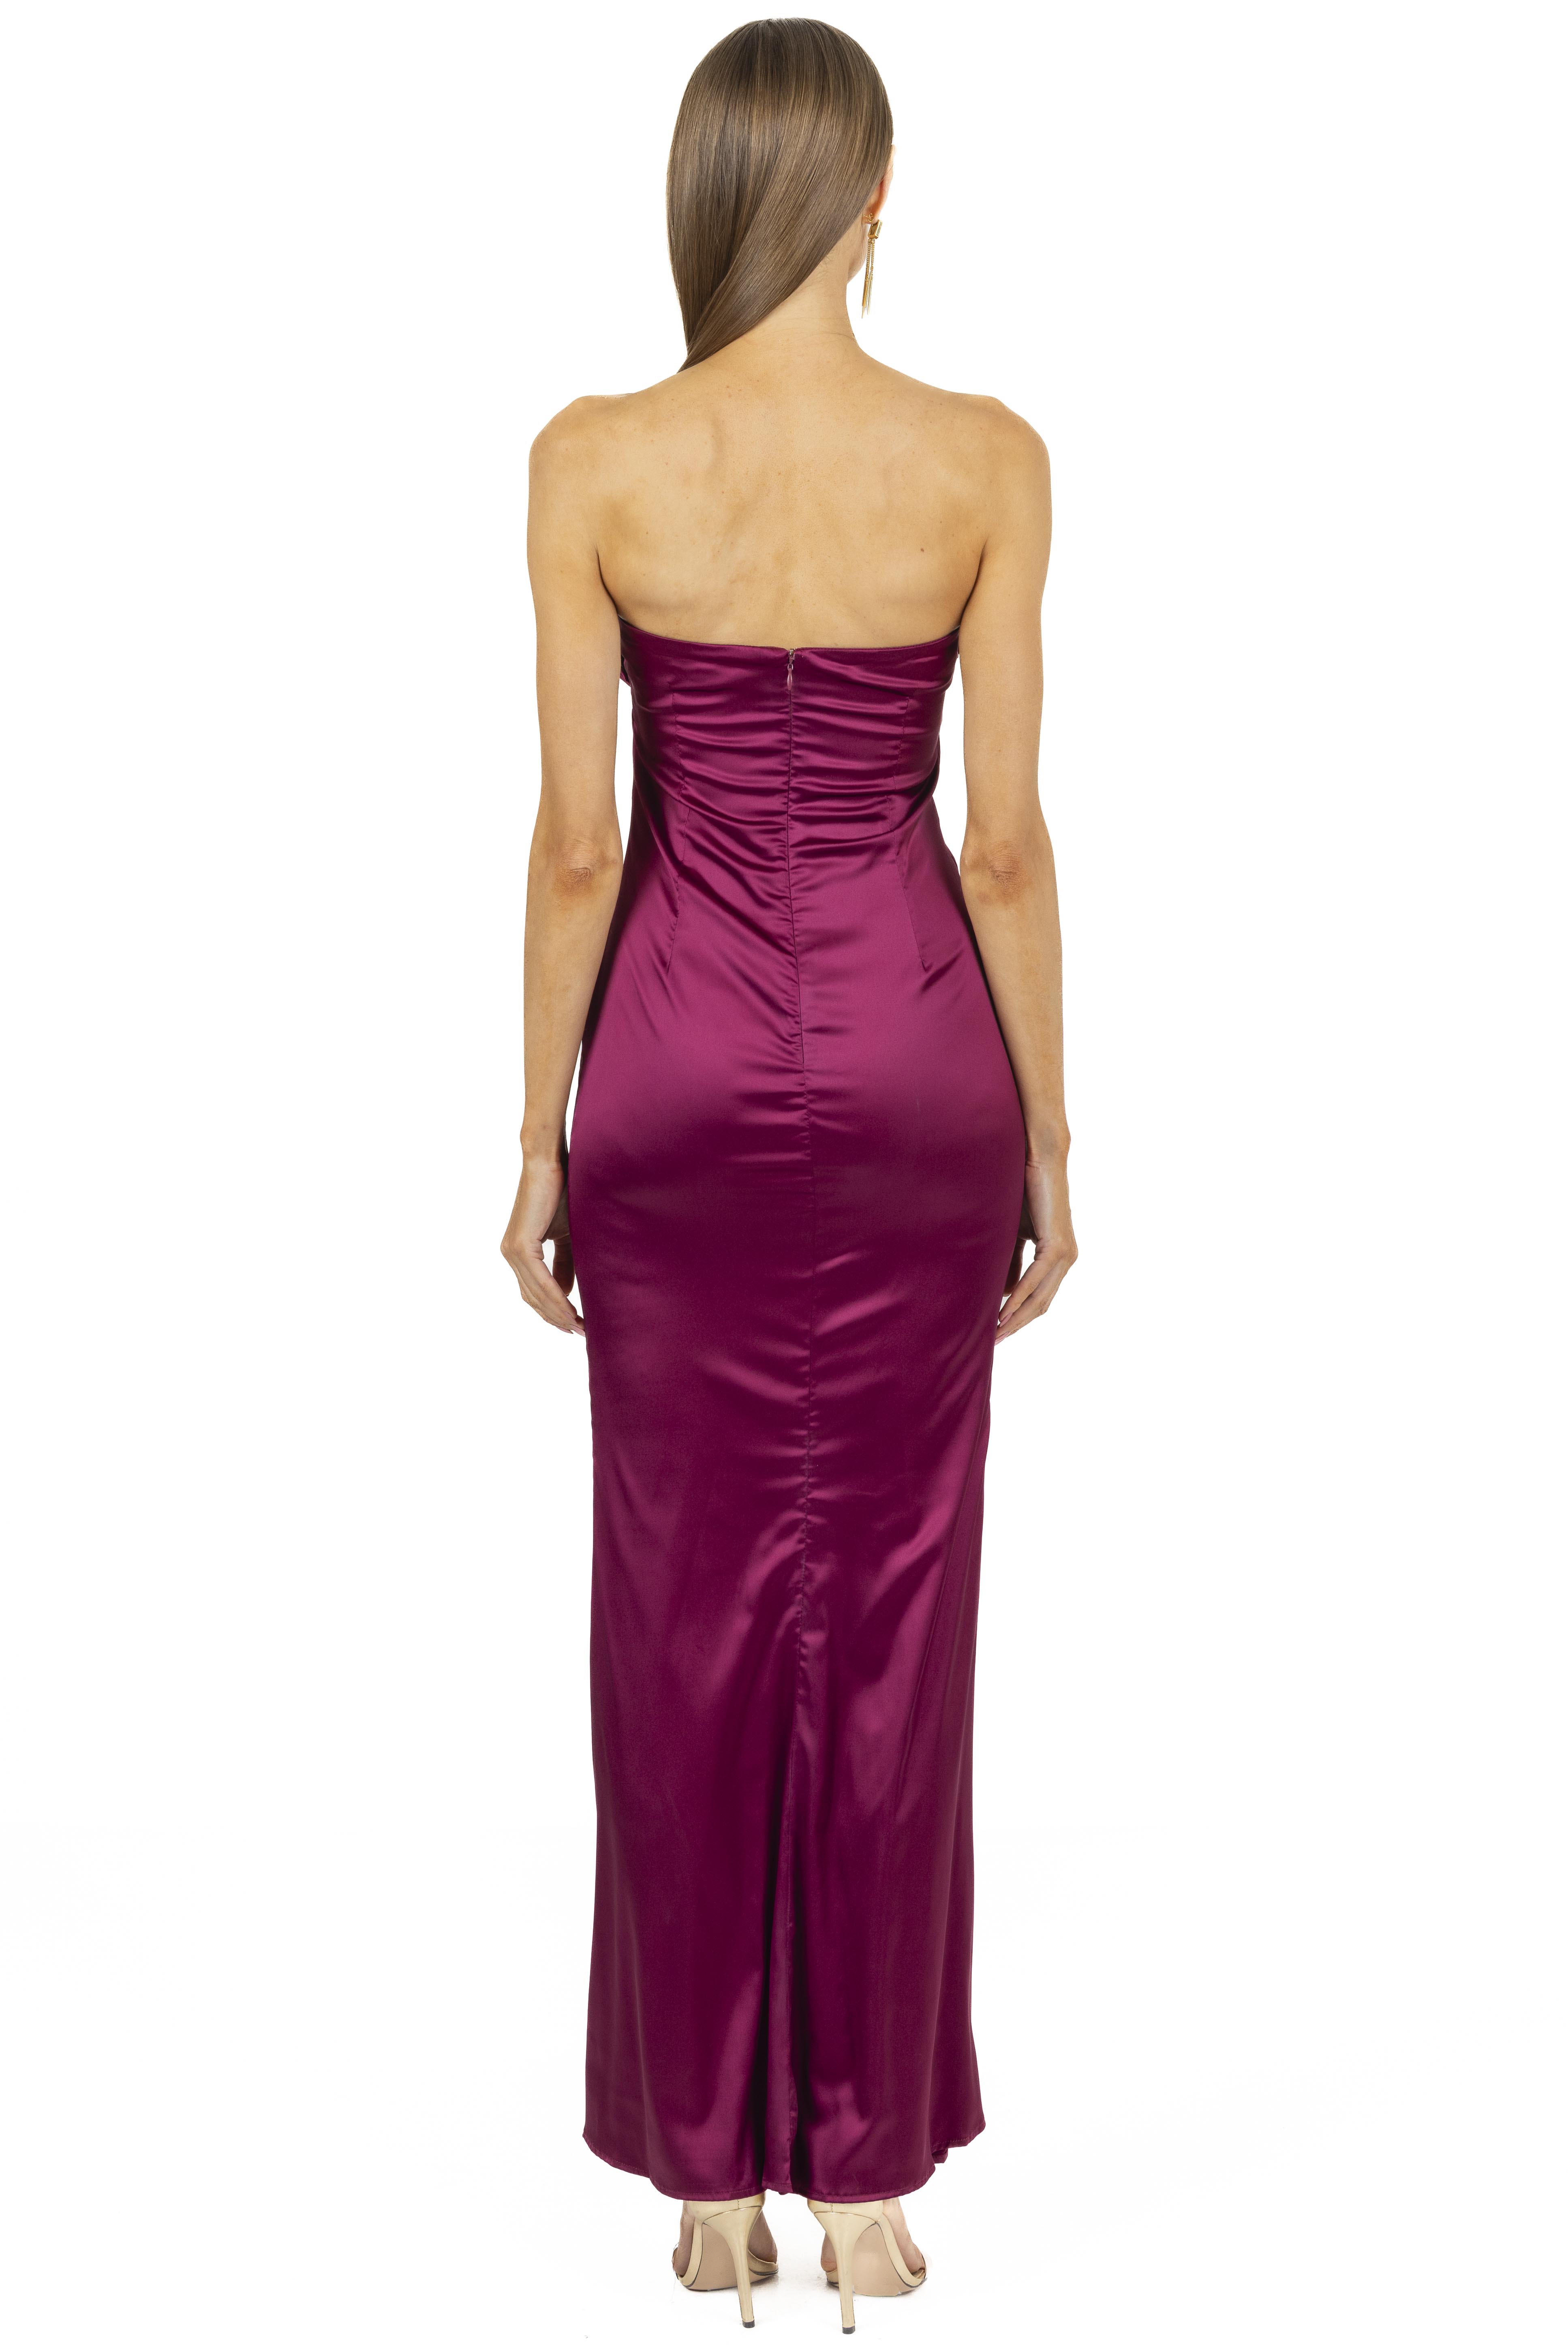 ROSELINI GOWN